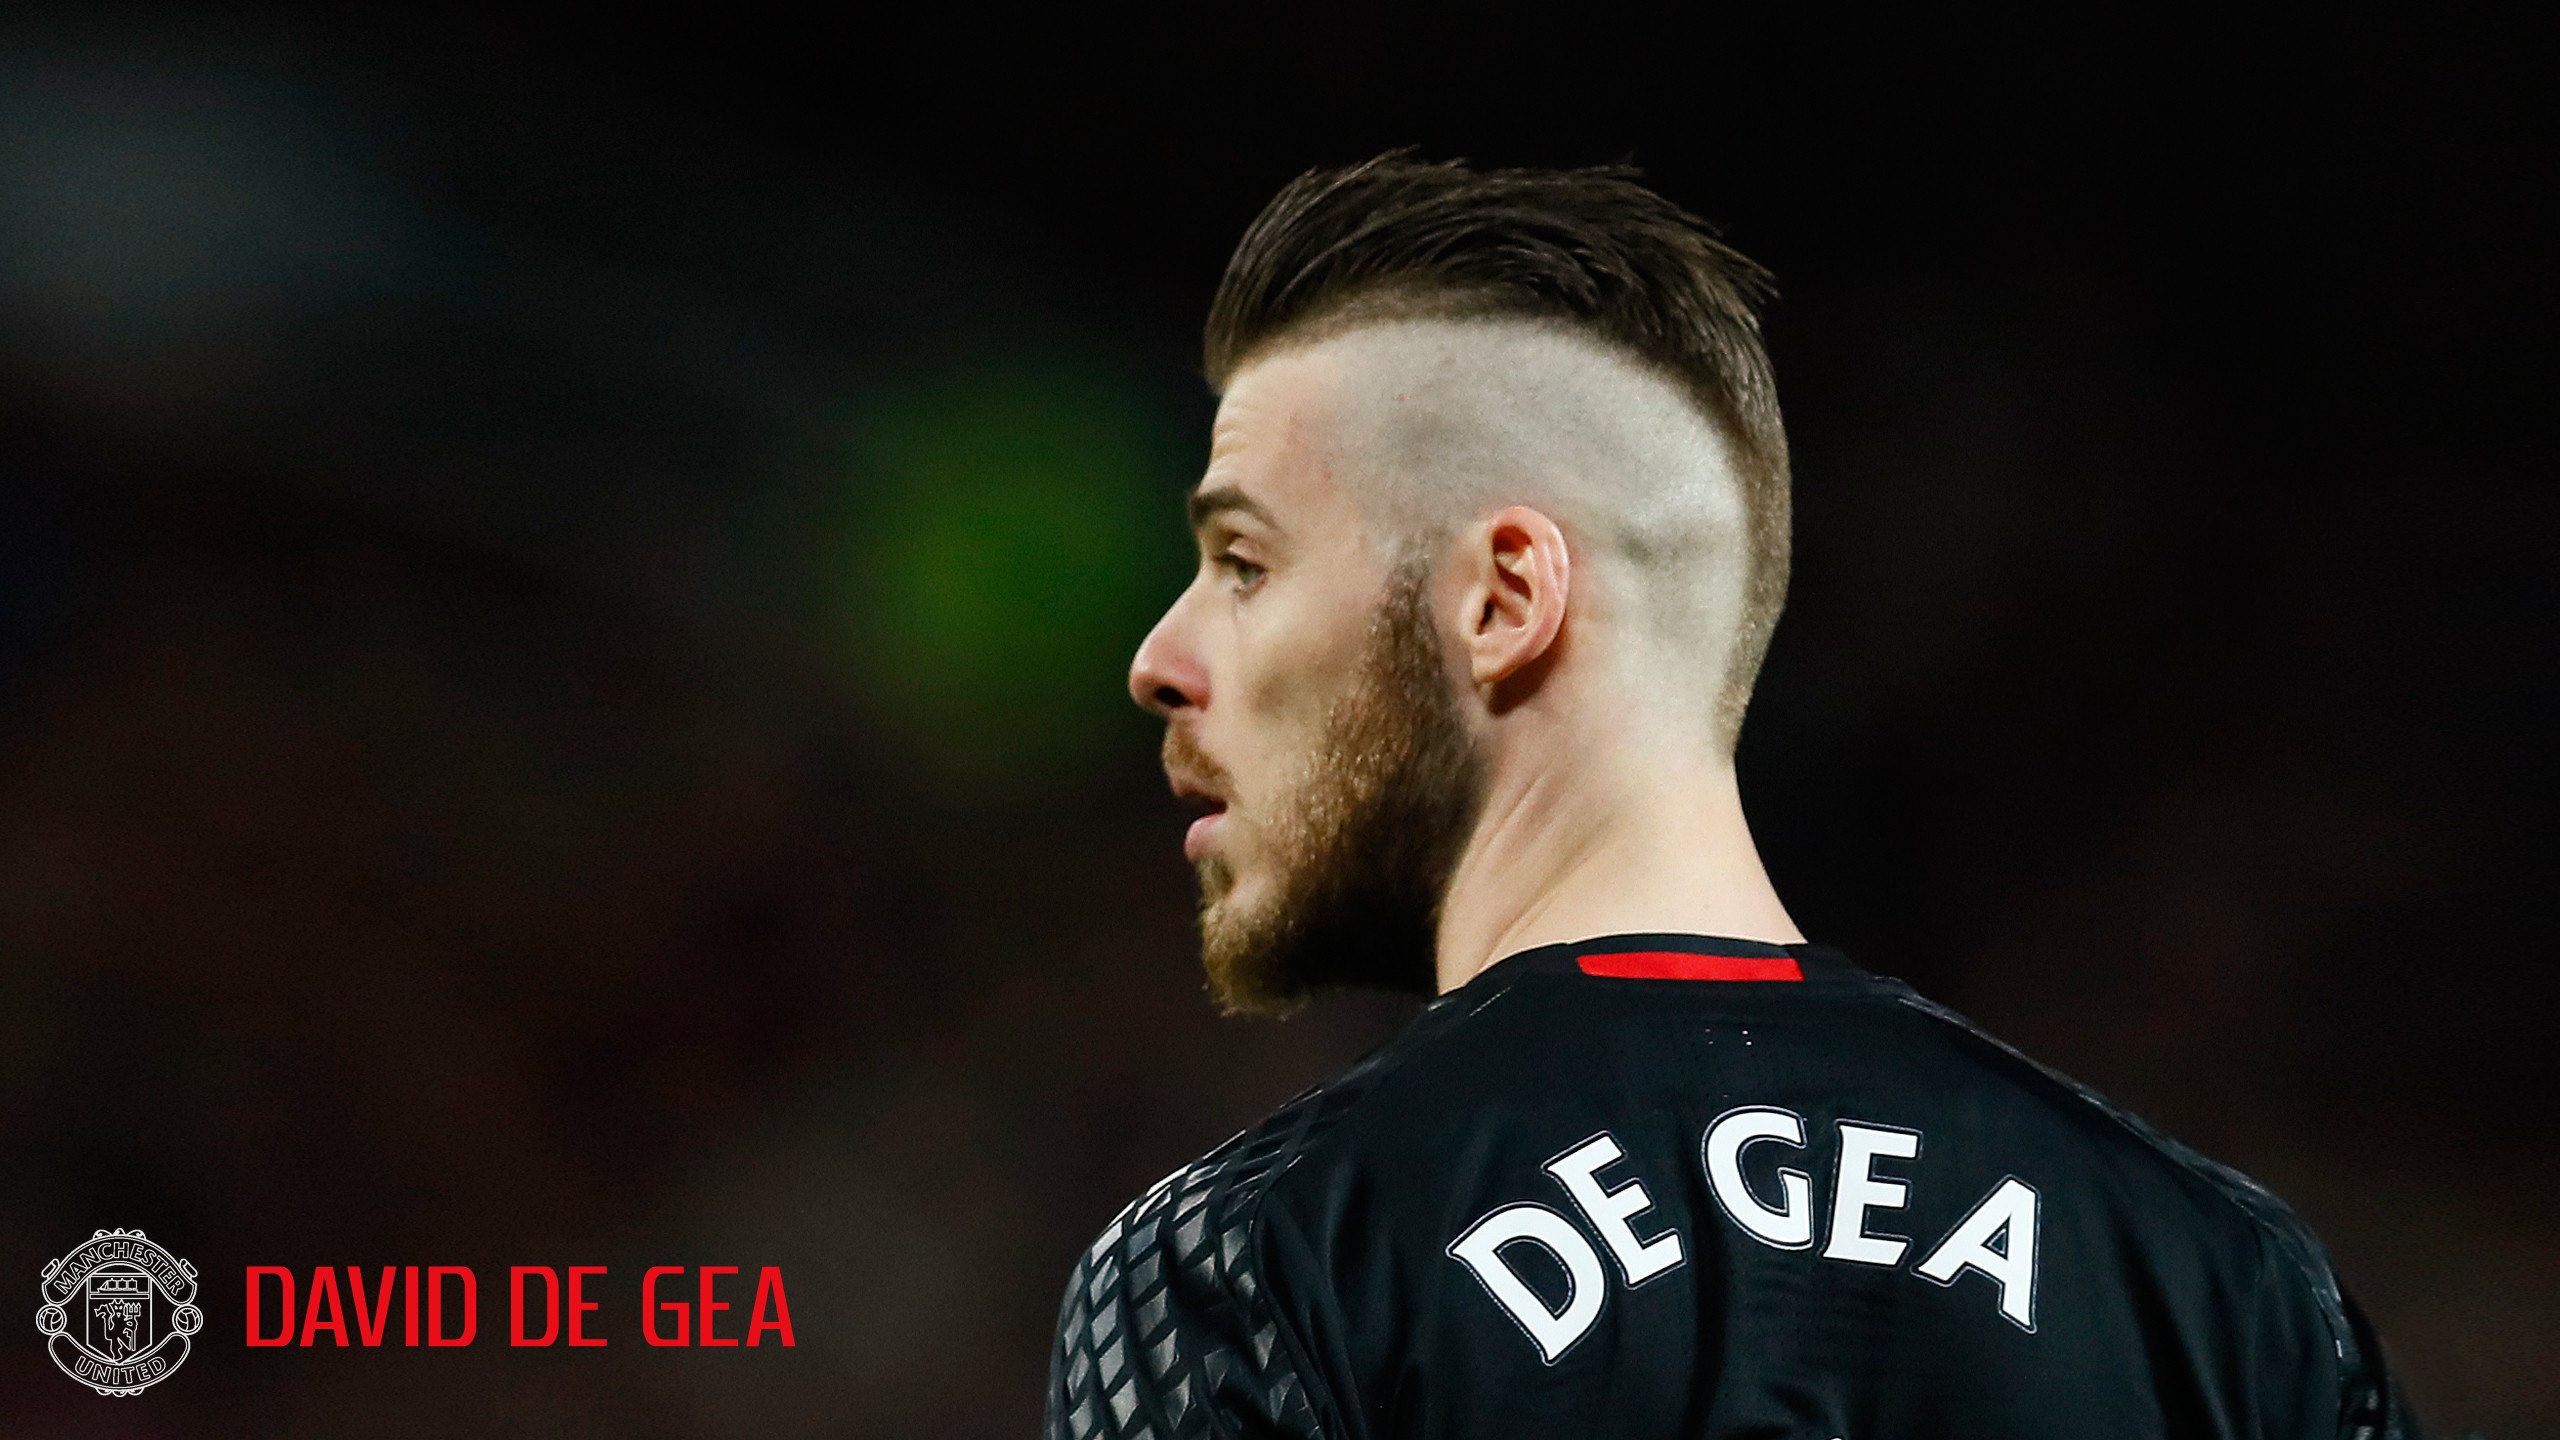 I Love To Share This Picture Of David De Gea Manchester - Manchester United Players 2018 - HD Wallpaper 